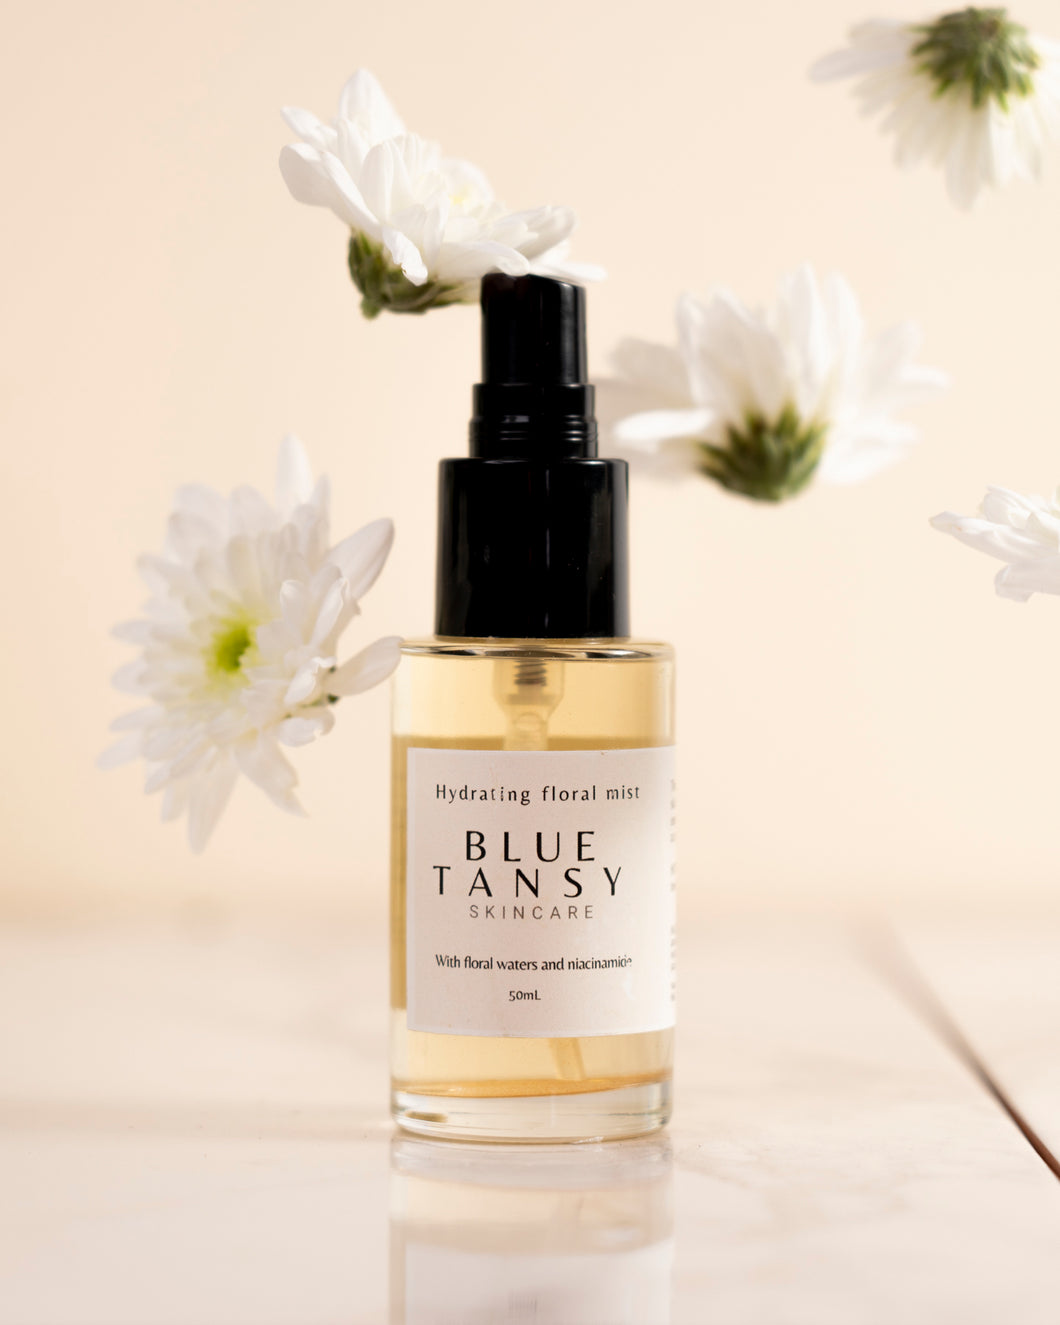 Hydrating floral mist